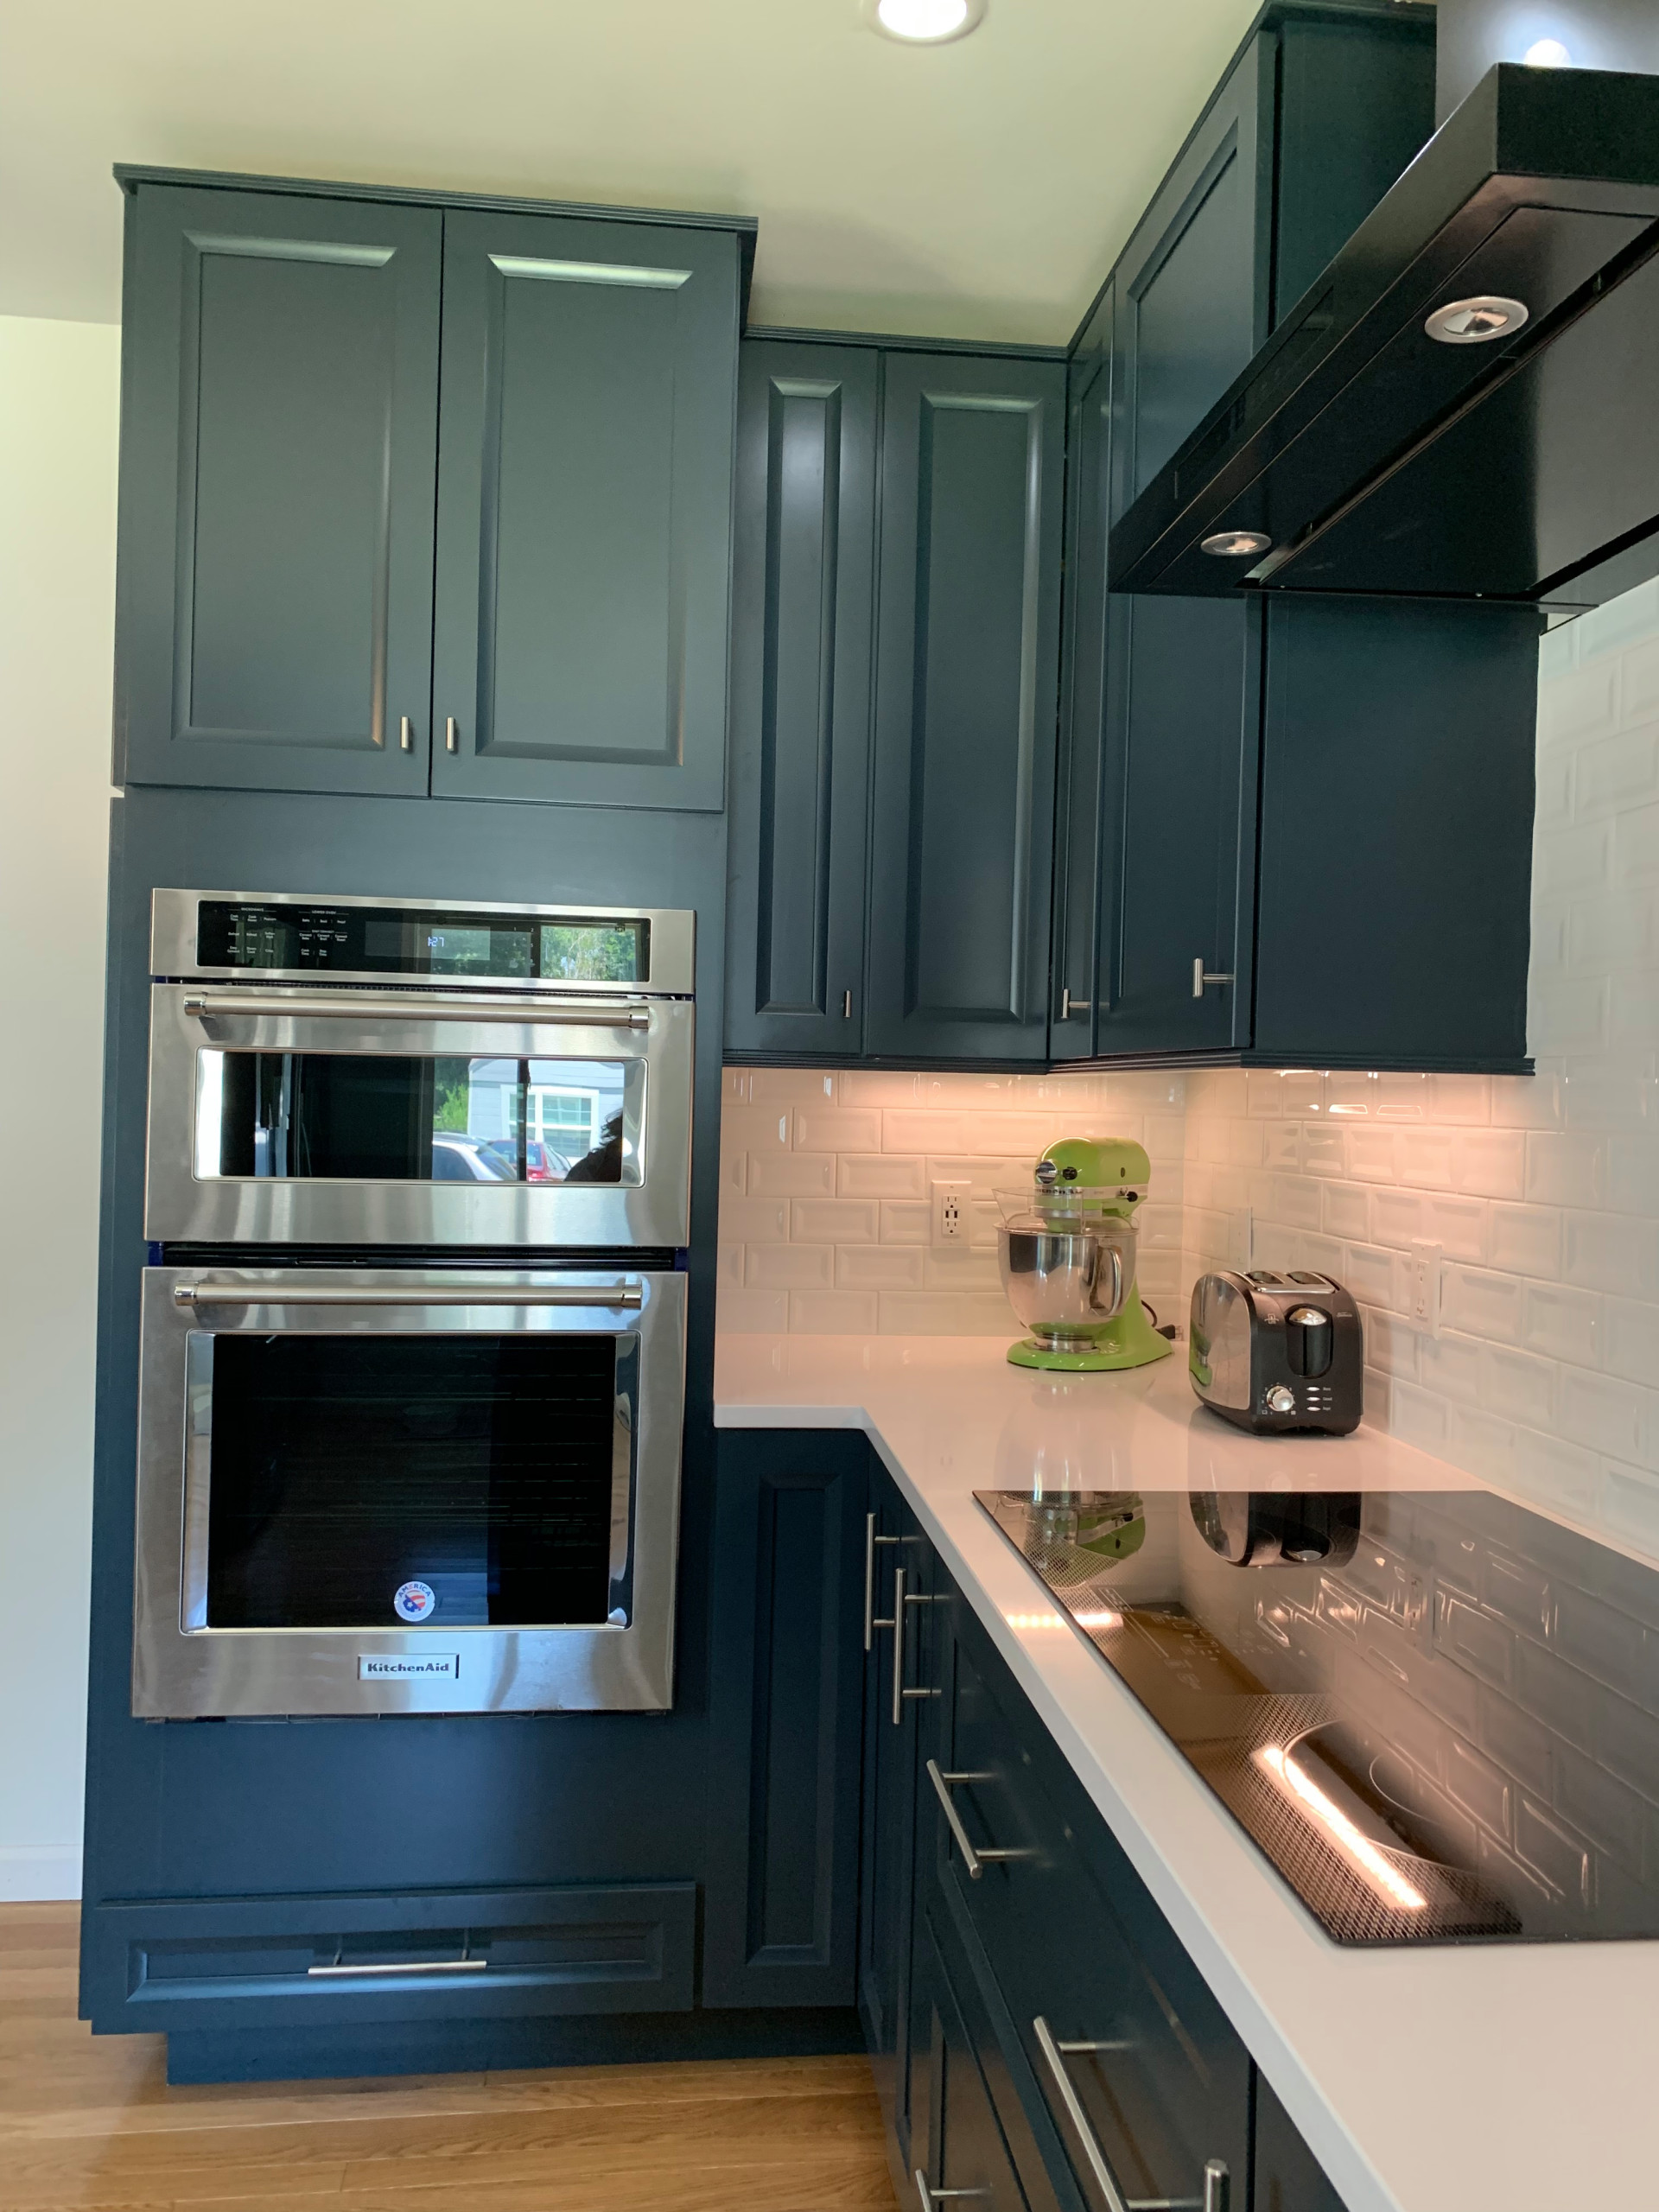 Bright Polished Textures w/Satin Finish on Painted Cabinets  - Stunning!